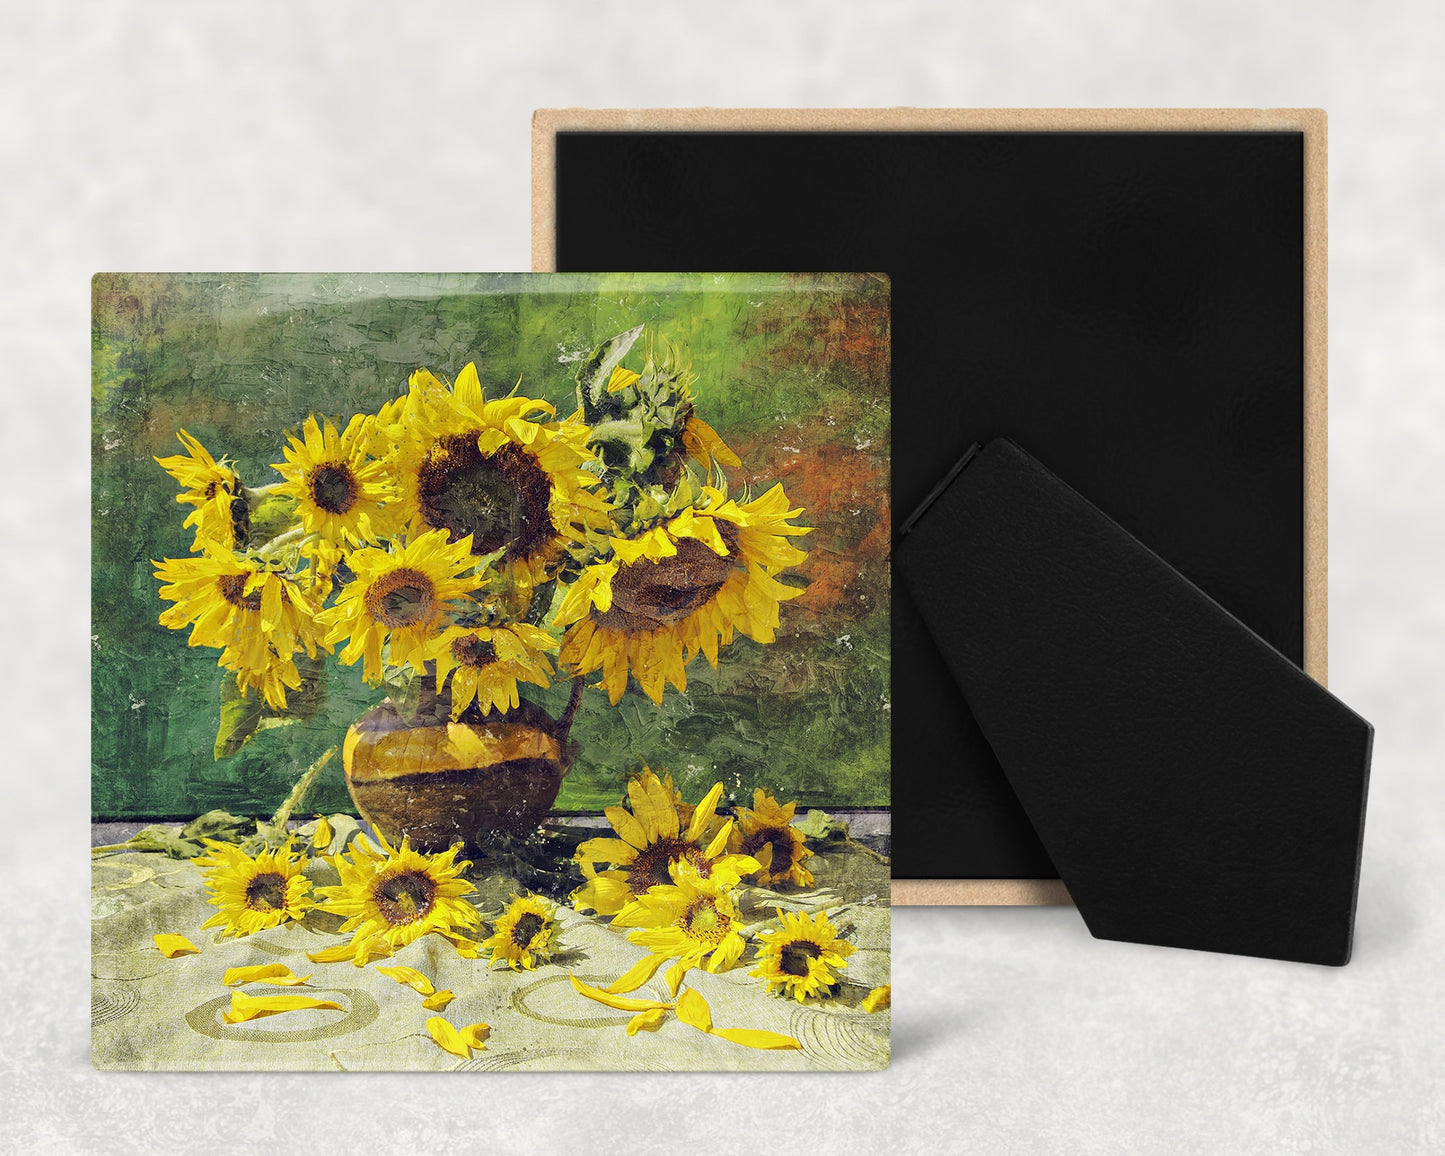 Sunflowers Still Life Art Decorative Ceramic Tile with Optional Easel Back - Available in 3 Sizes